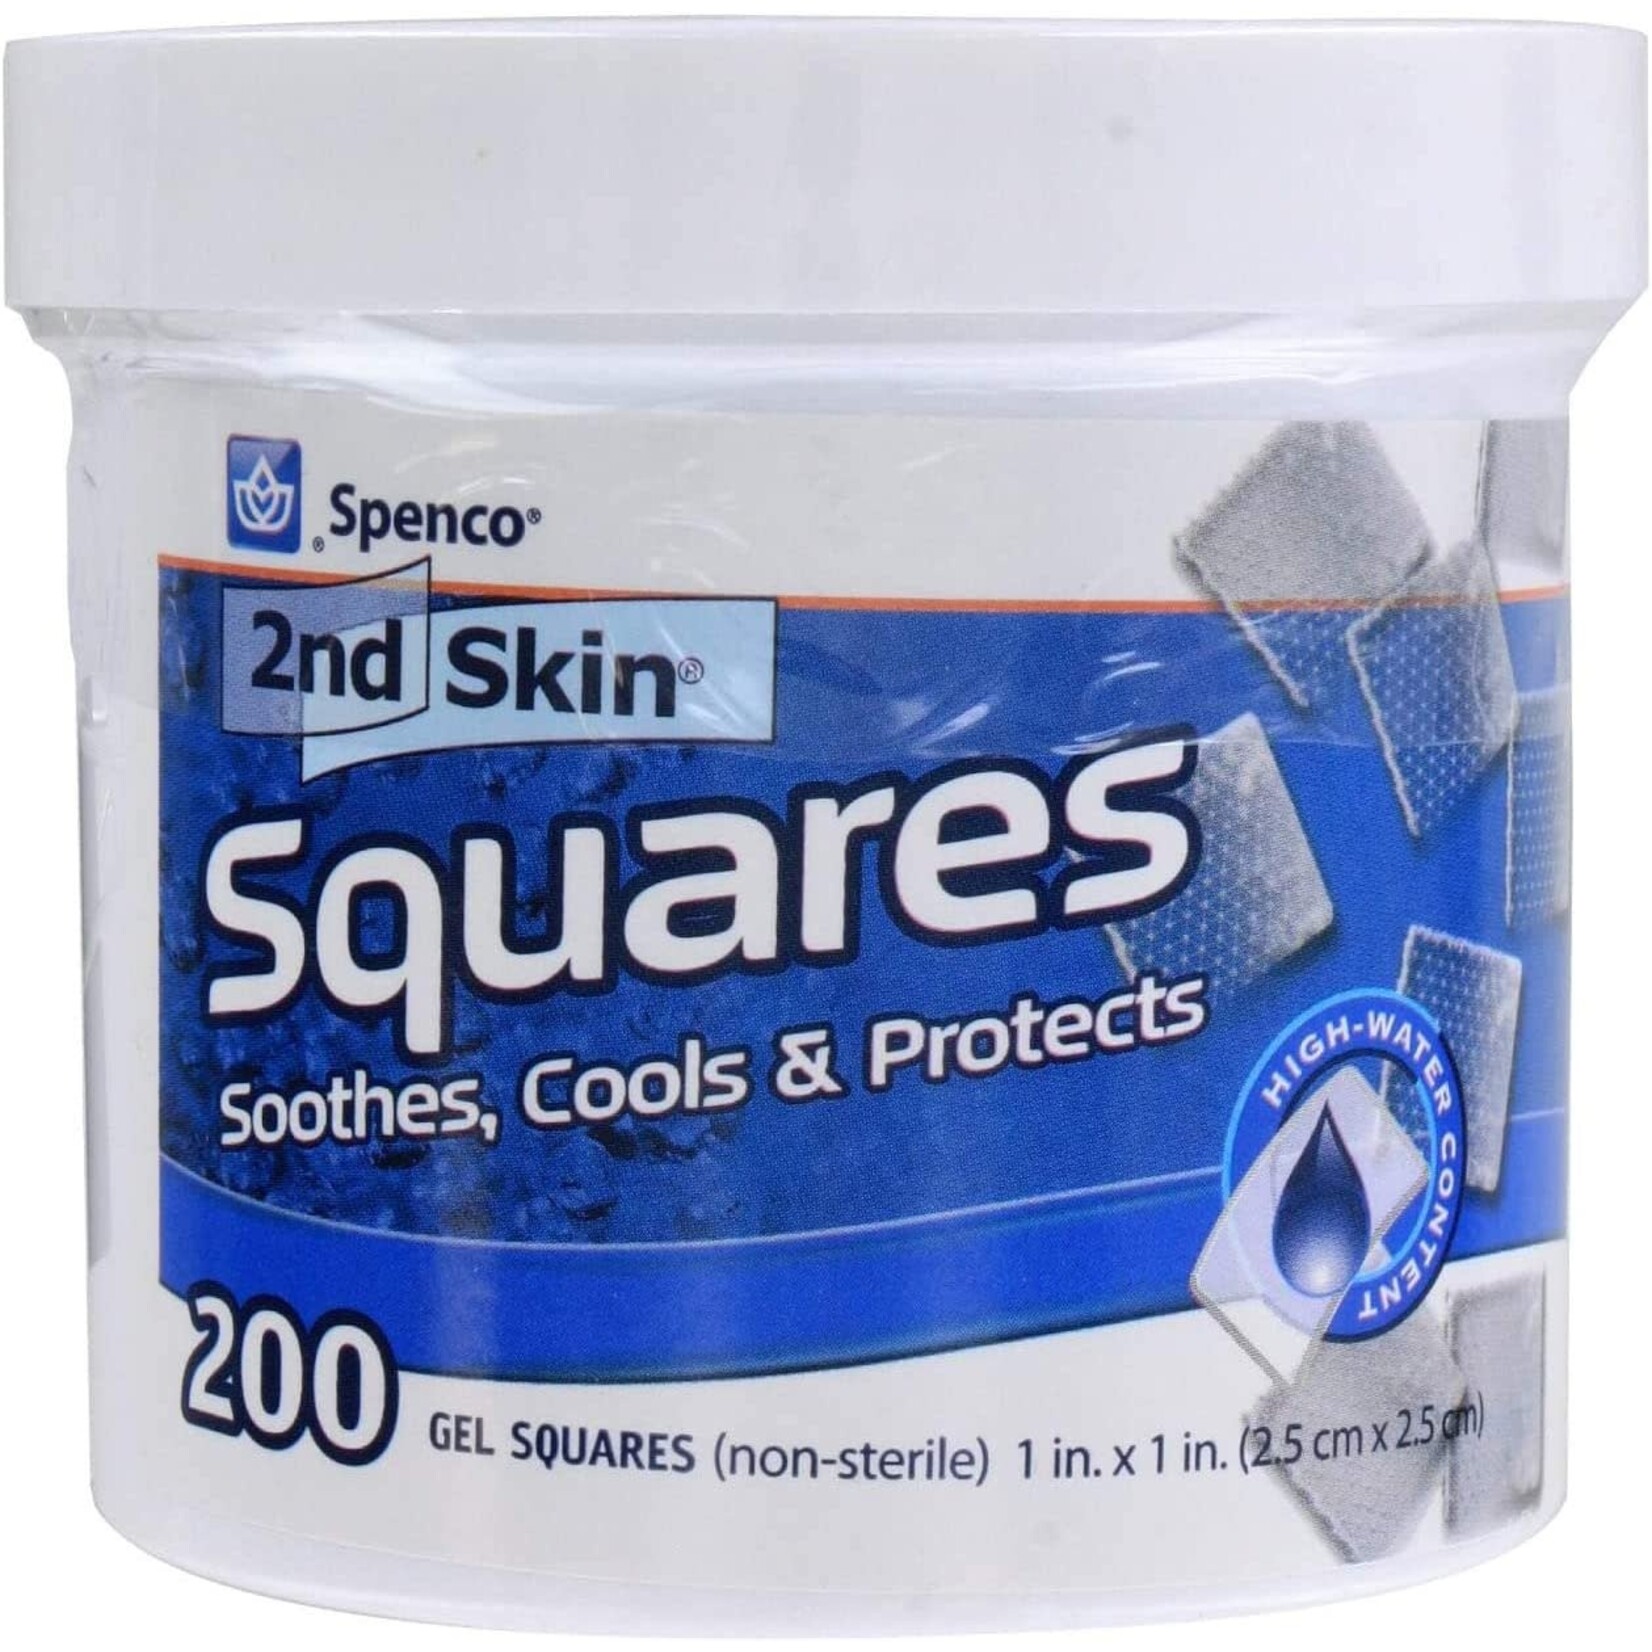 2nd Skin Squares Soothing Protection, Gel Squares 200-Count, Bacterial Barrier, One Size 1x1"